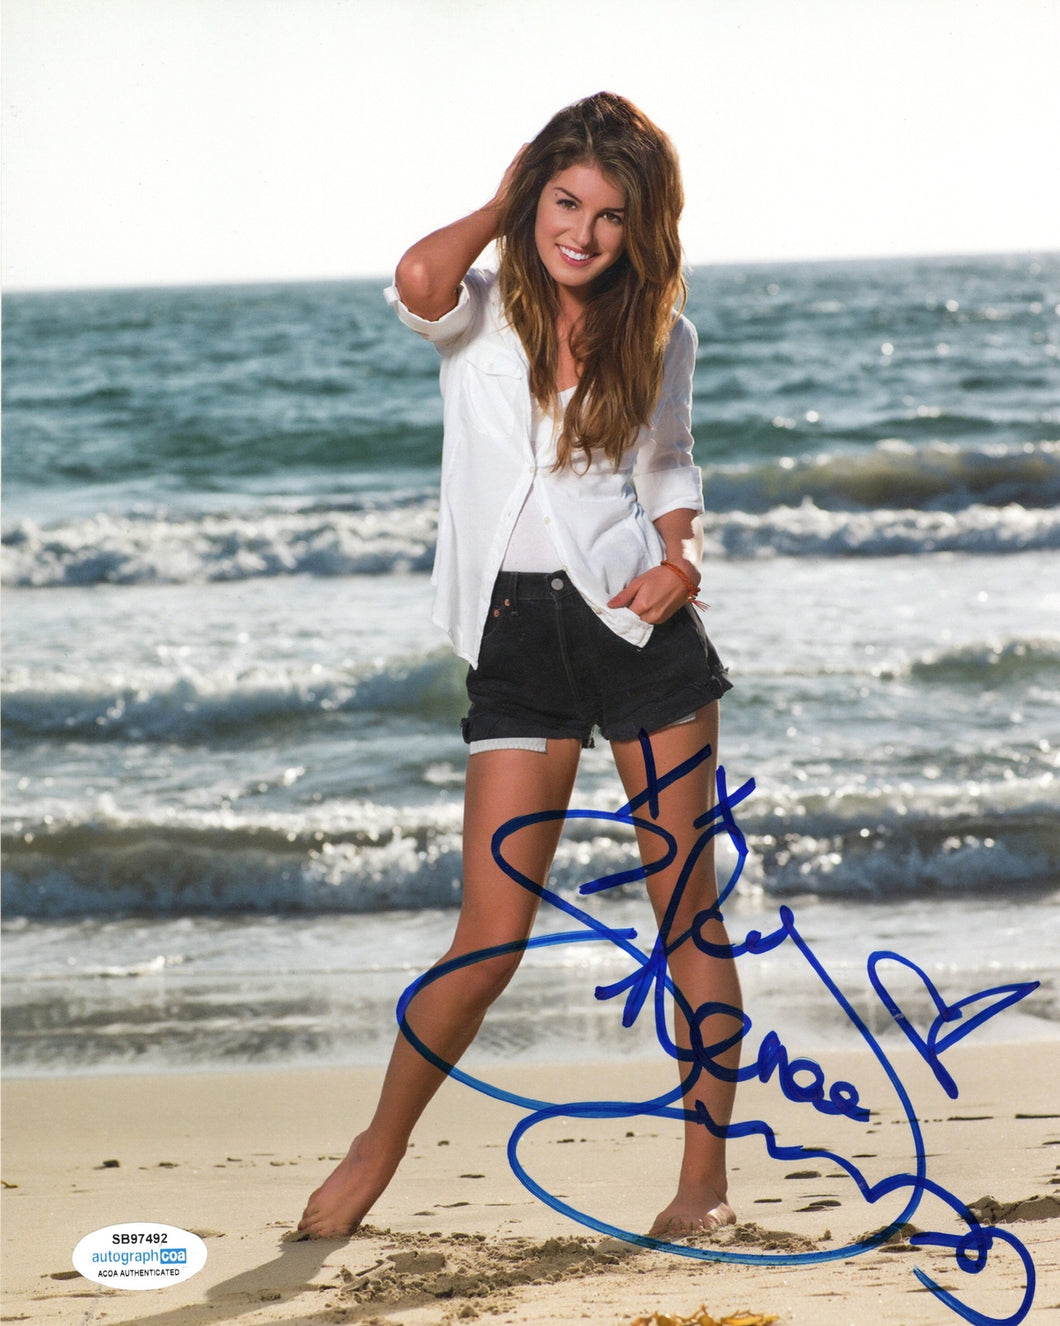 Shenae Grimes Autographed Signed 8x10 Sexy Legs Beach Photo 90210